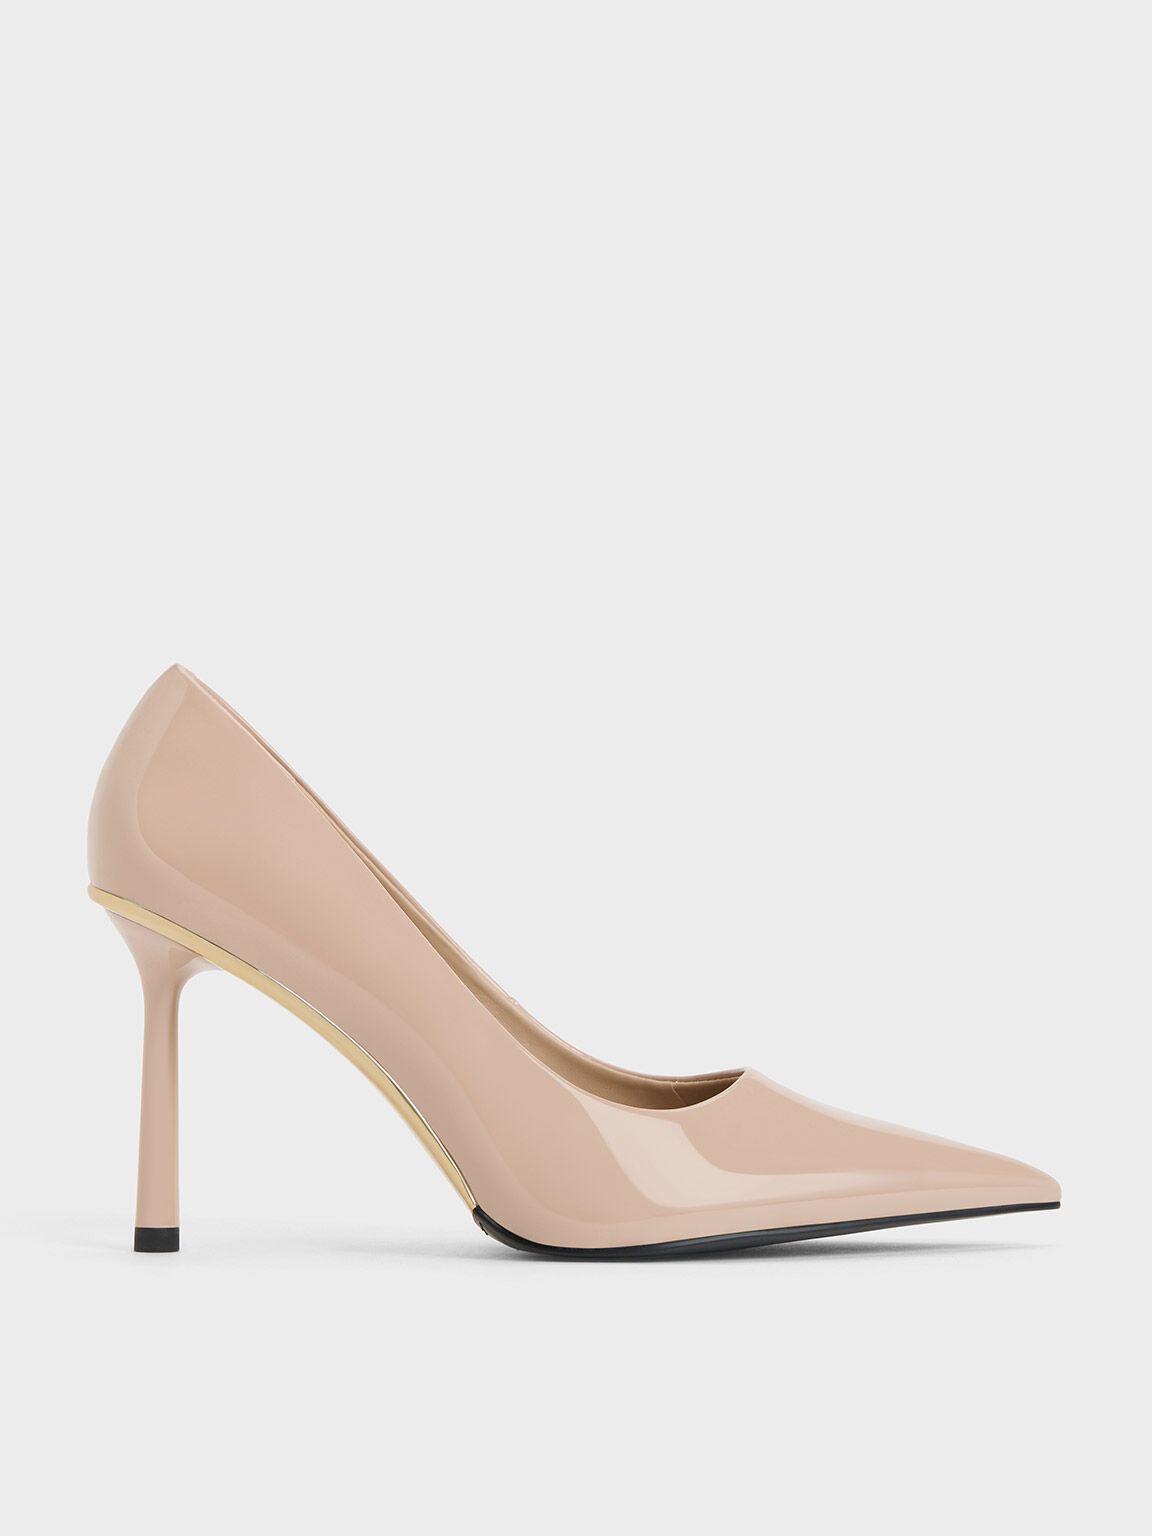 Nude Patent Pointed-Toe Stiletto Heels - CHARLES & KEITH SG